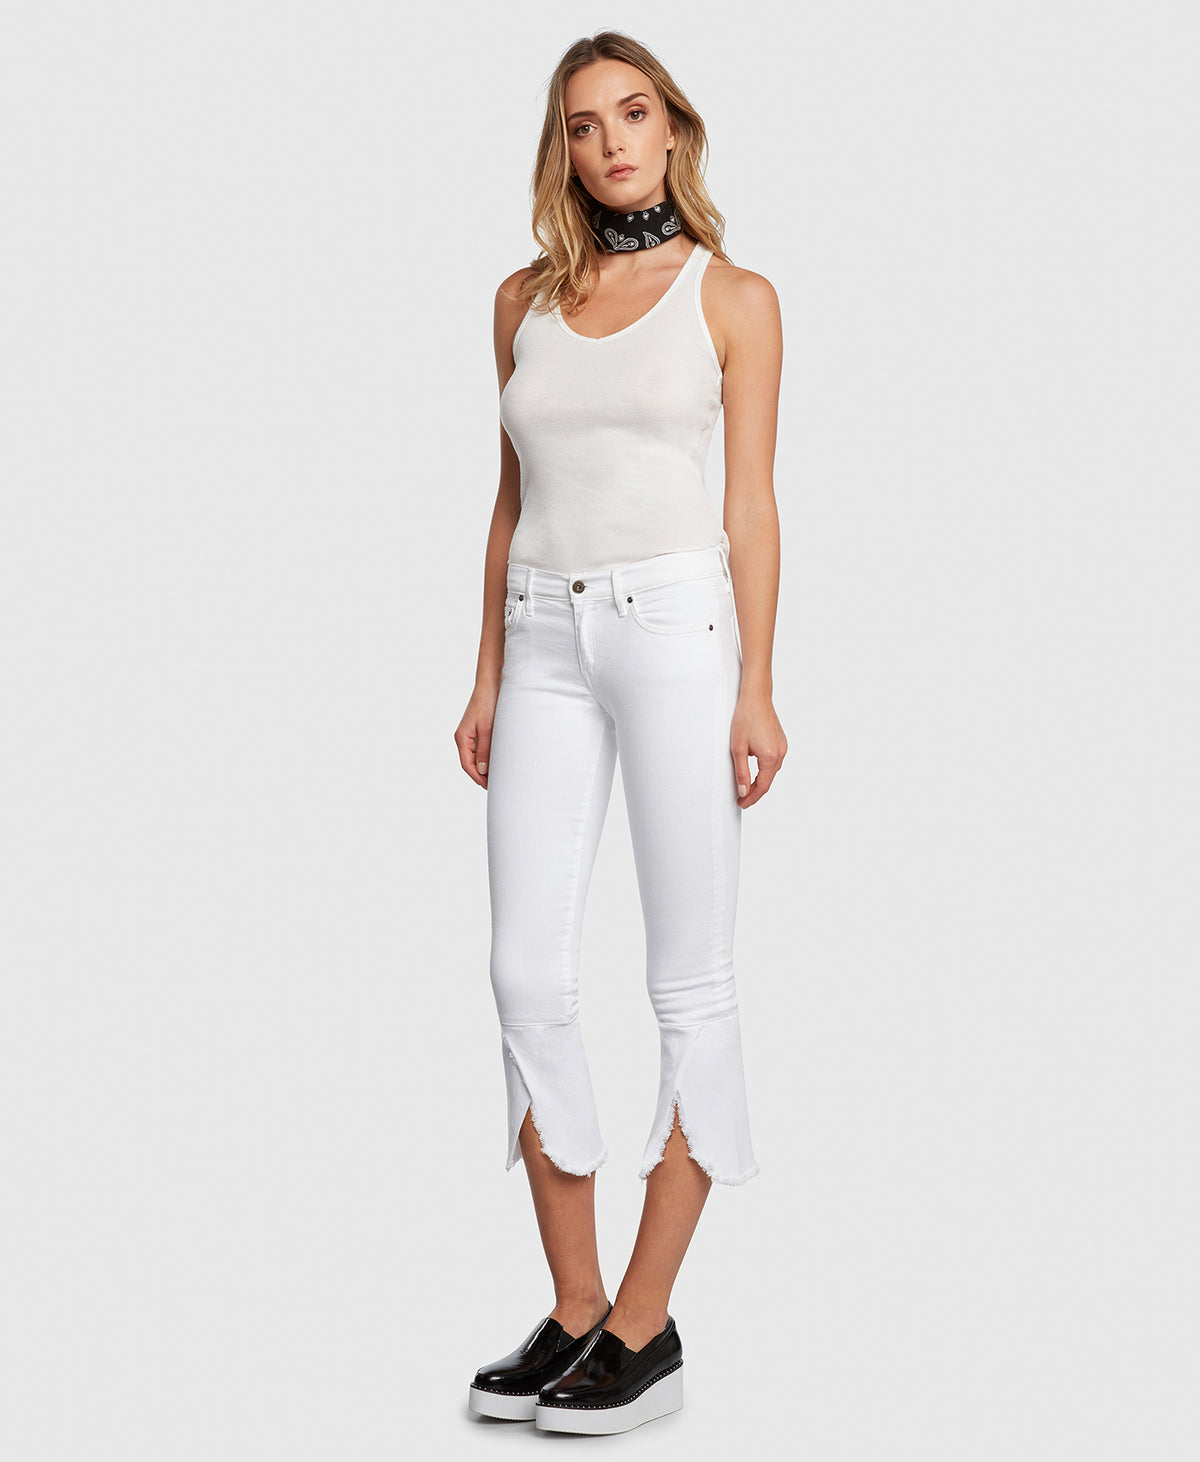 Principle FLIRT in Promise cropped jeans side